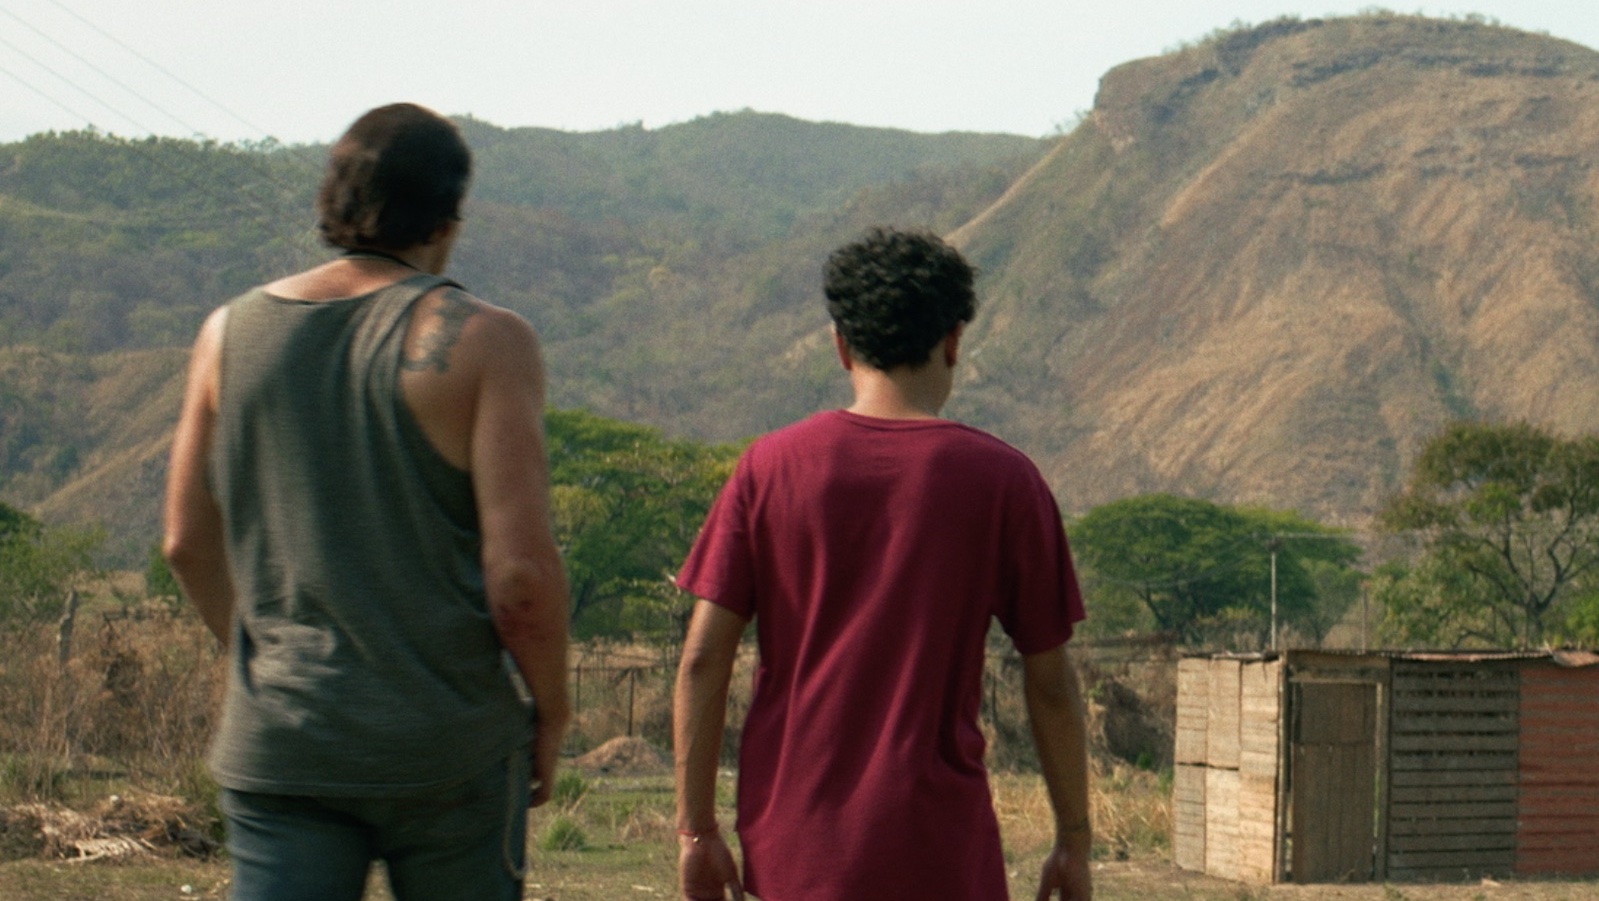 From behind, two people, an older man and a young man walk into a landscape surrounded by mountains